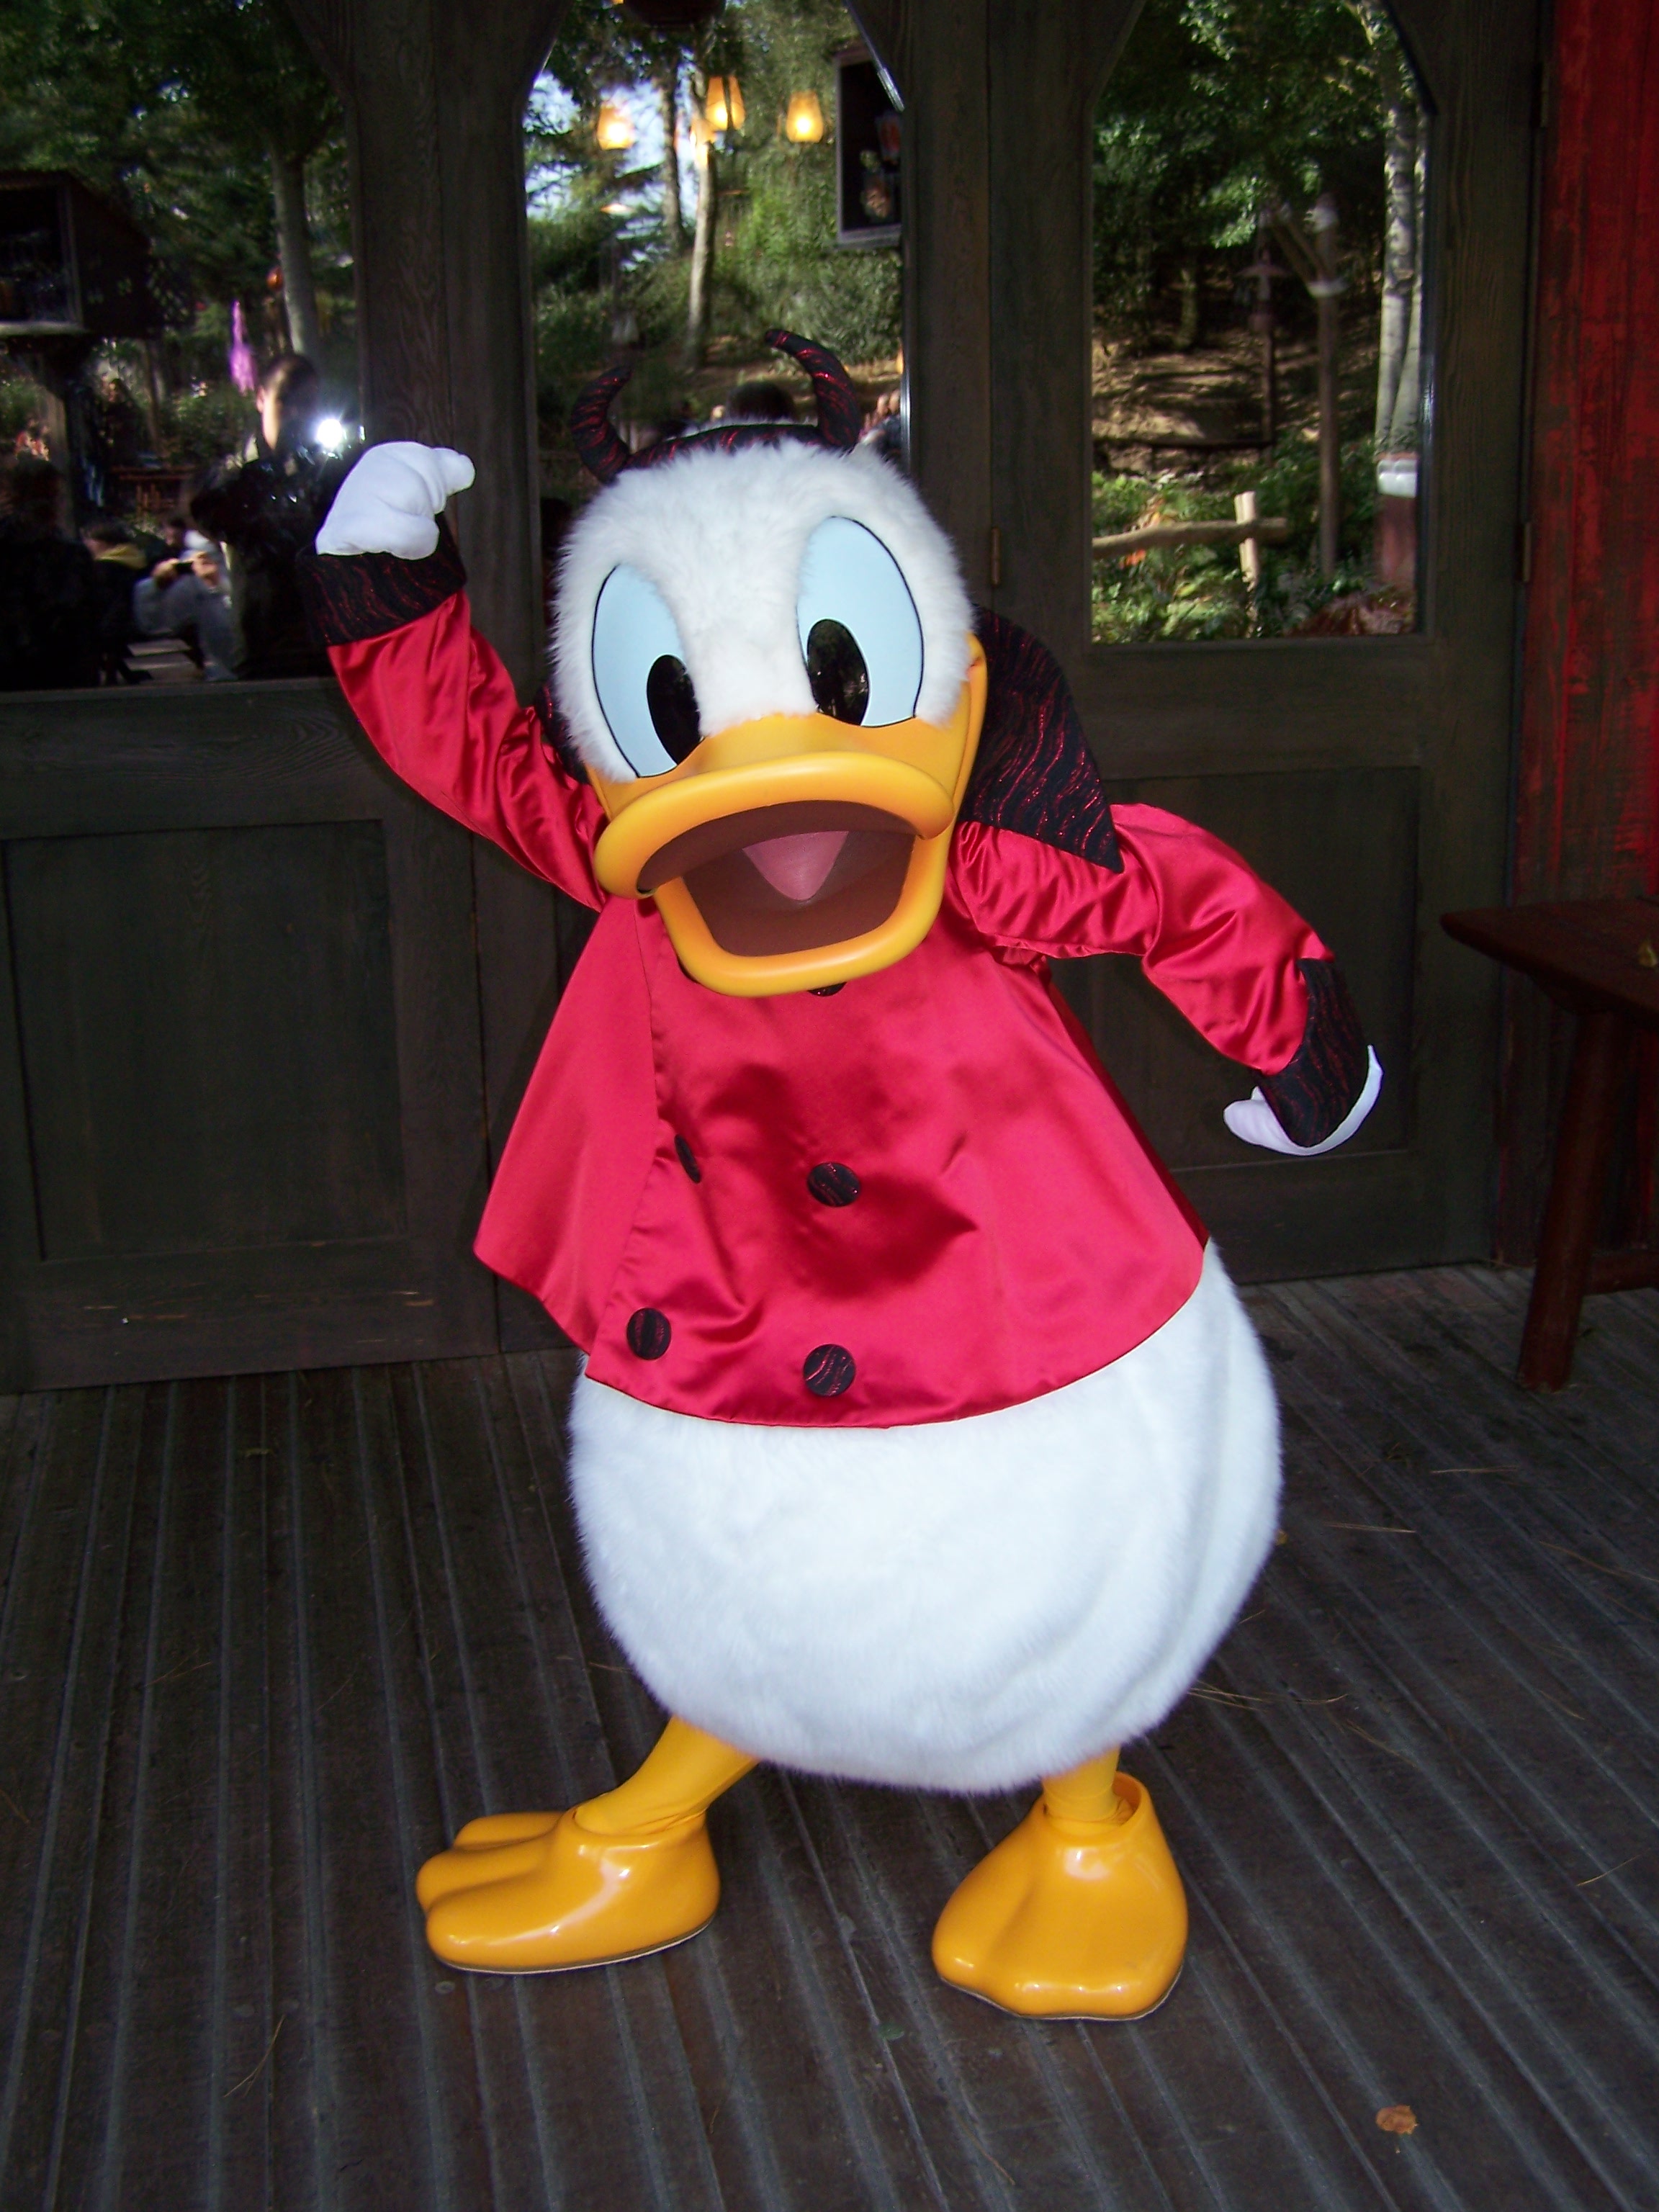 Donald wearing his devil outfit during the Halloween Season. This outfit isn't being used anymore inside the Parks, but can be found sometimes at the hotels during Halloween Season.